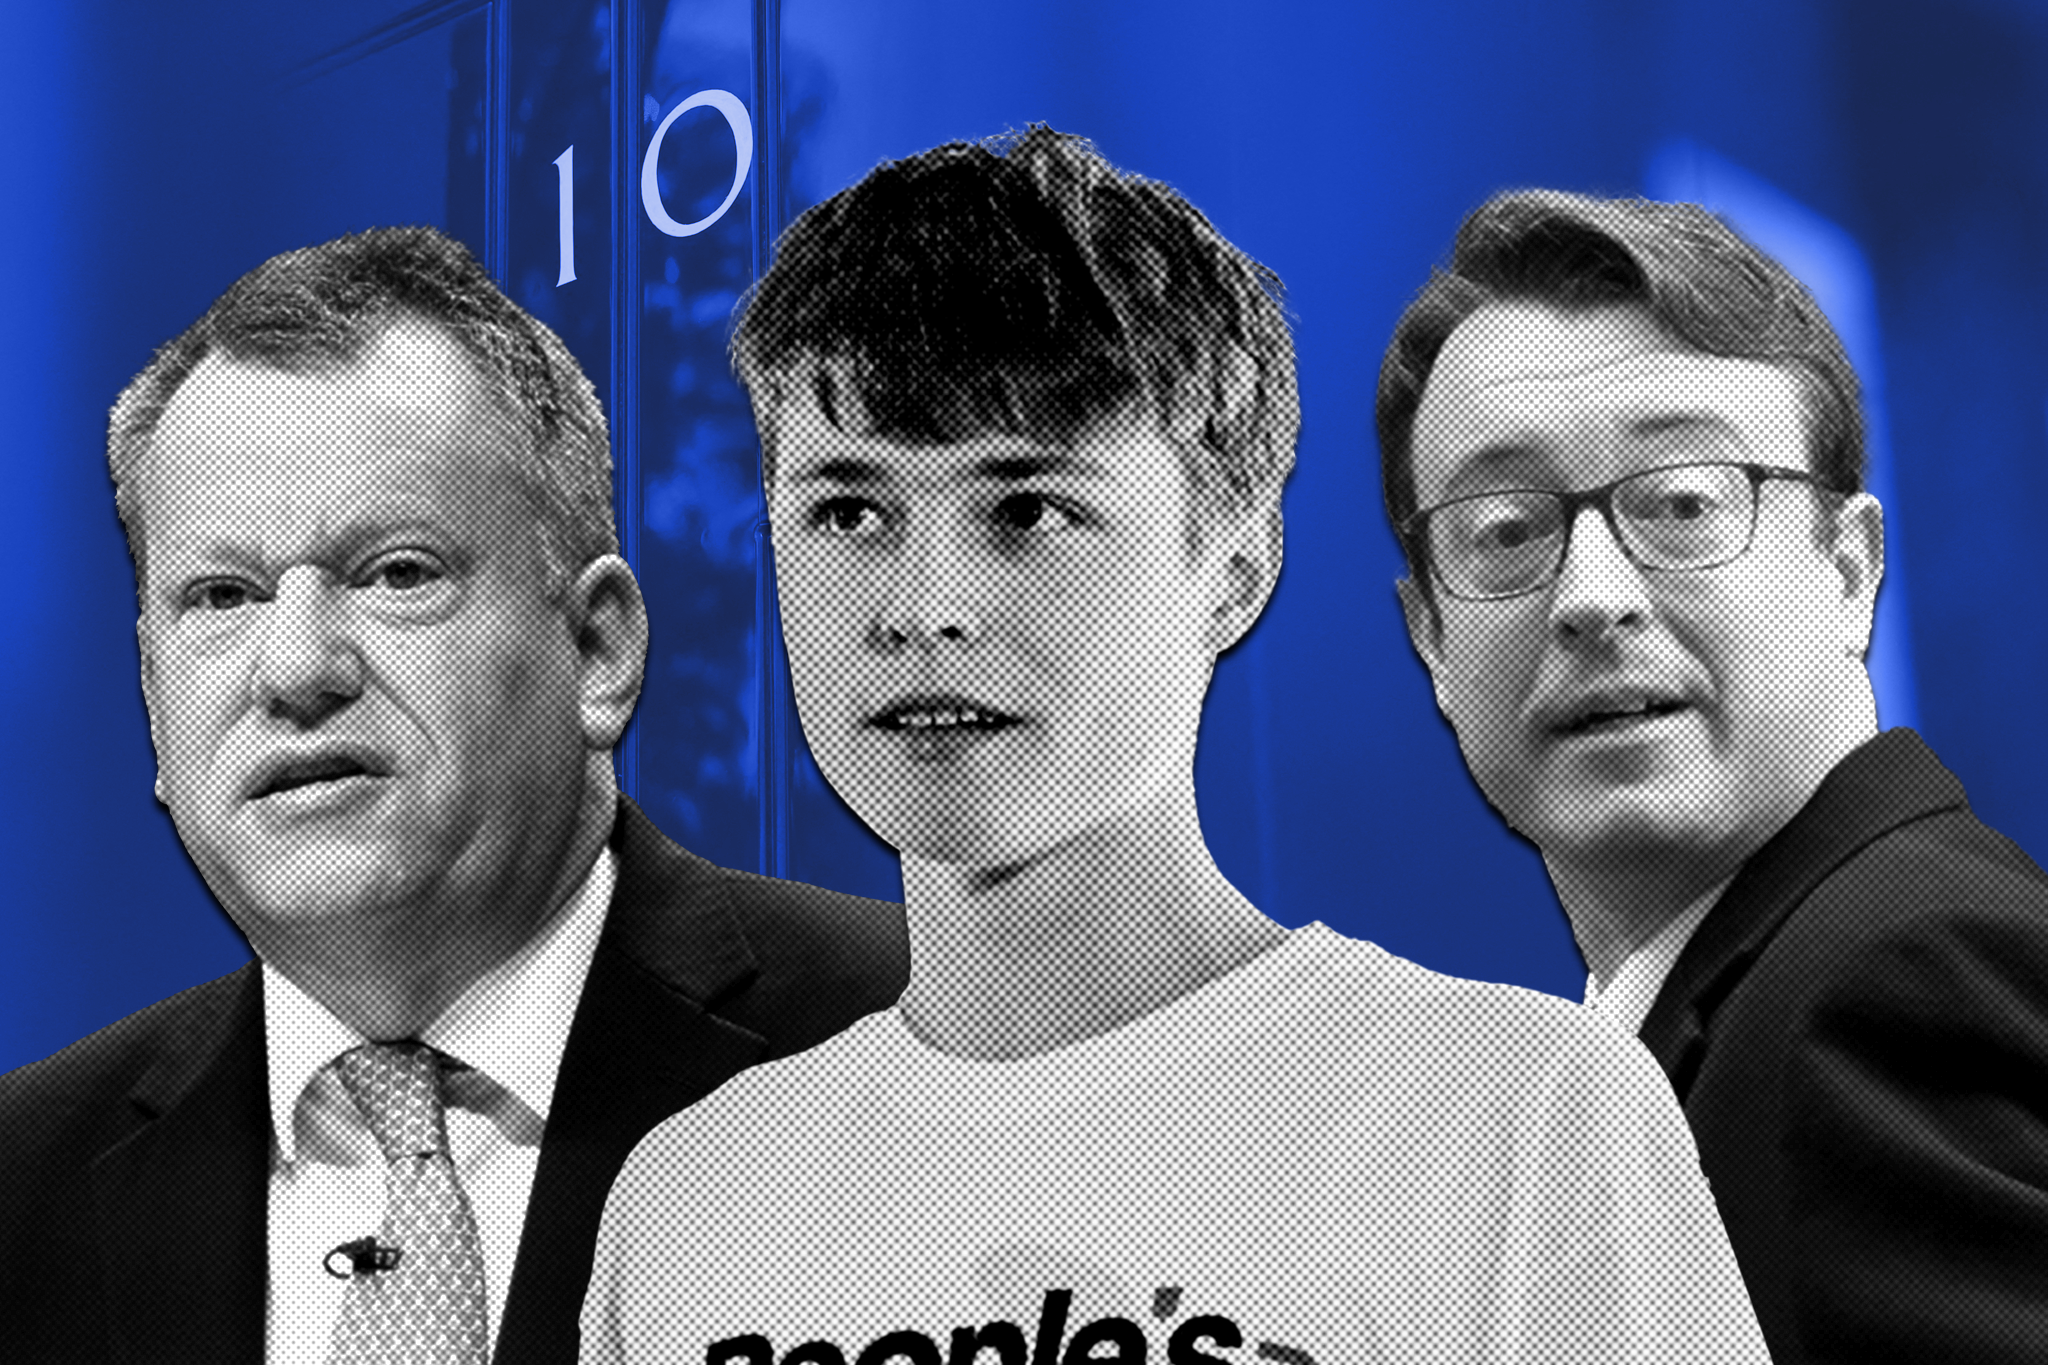 I have seen some hopeless attempts to dislodge prime ministers in my time, but Simon Clarke and co take the cake, writes John Rentoul